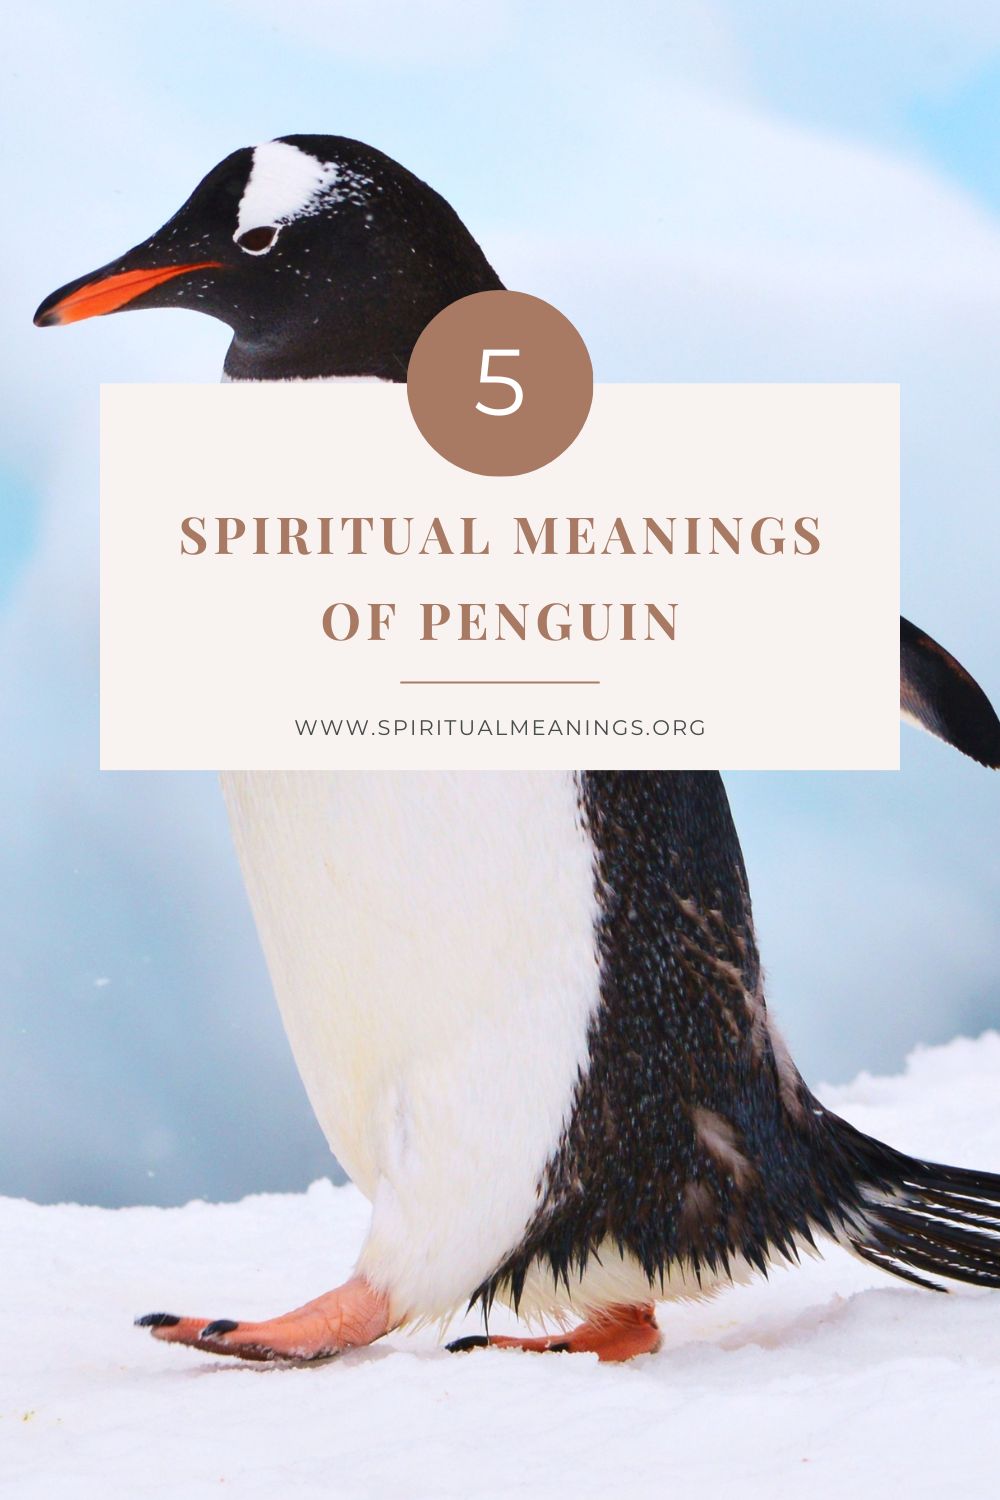 Spiritual Meanings of Penguin